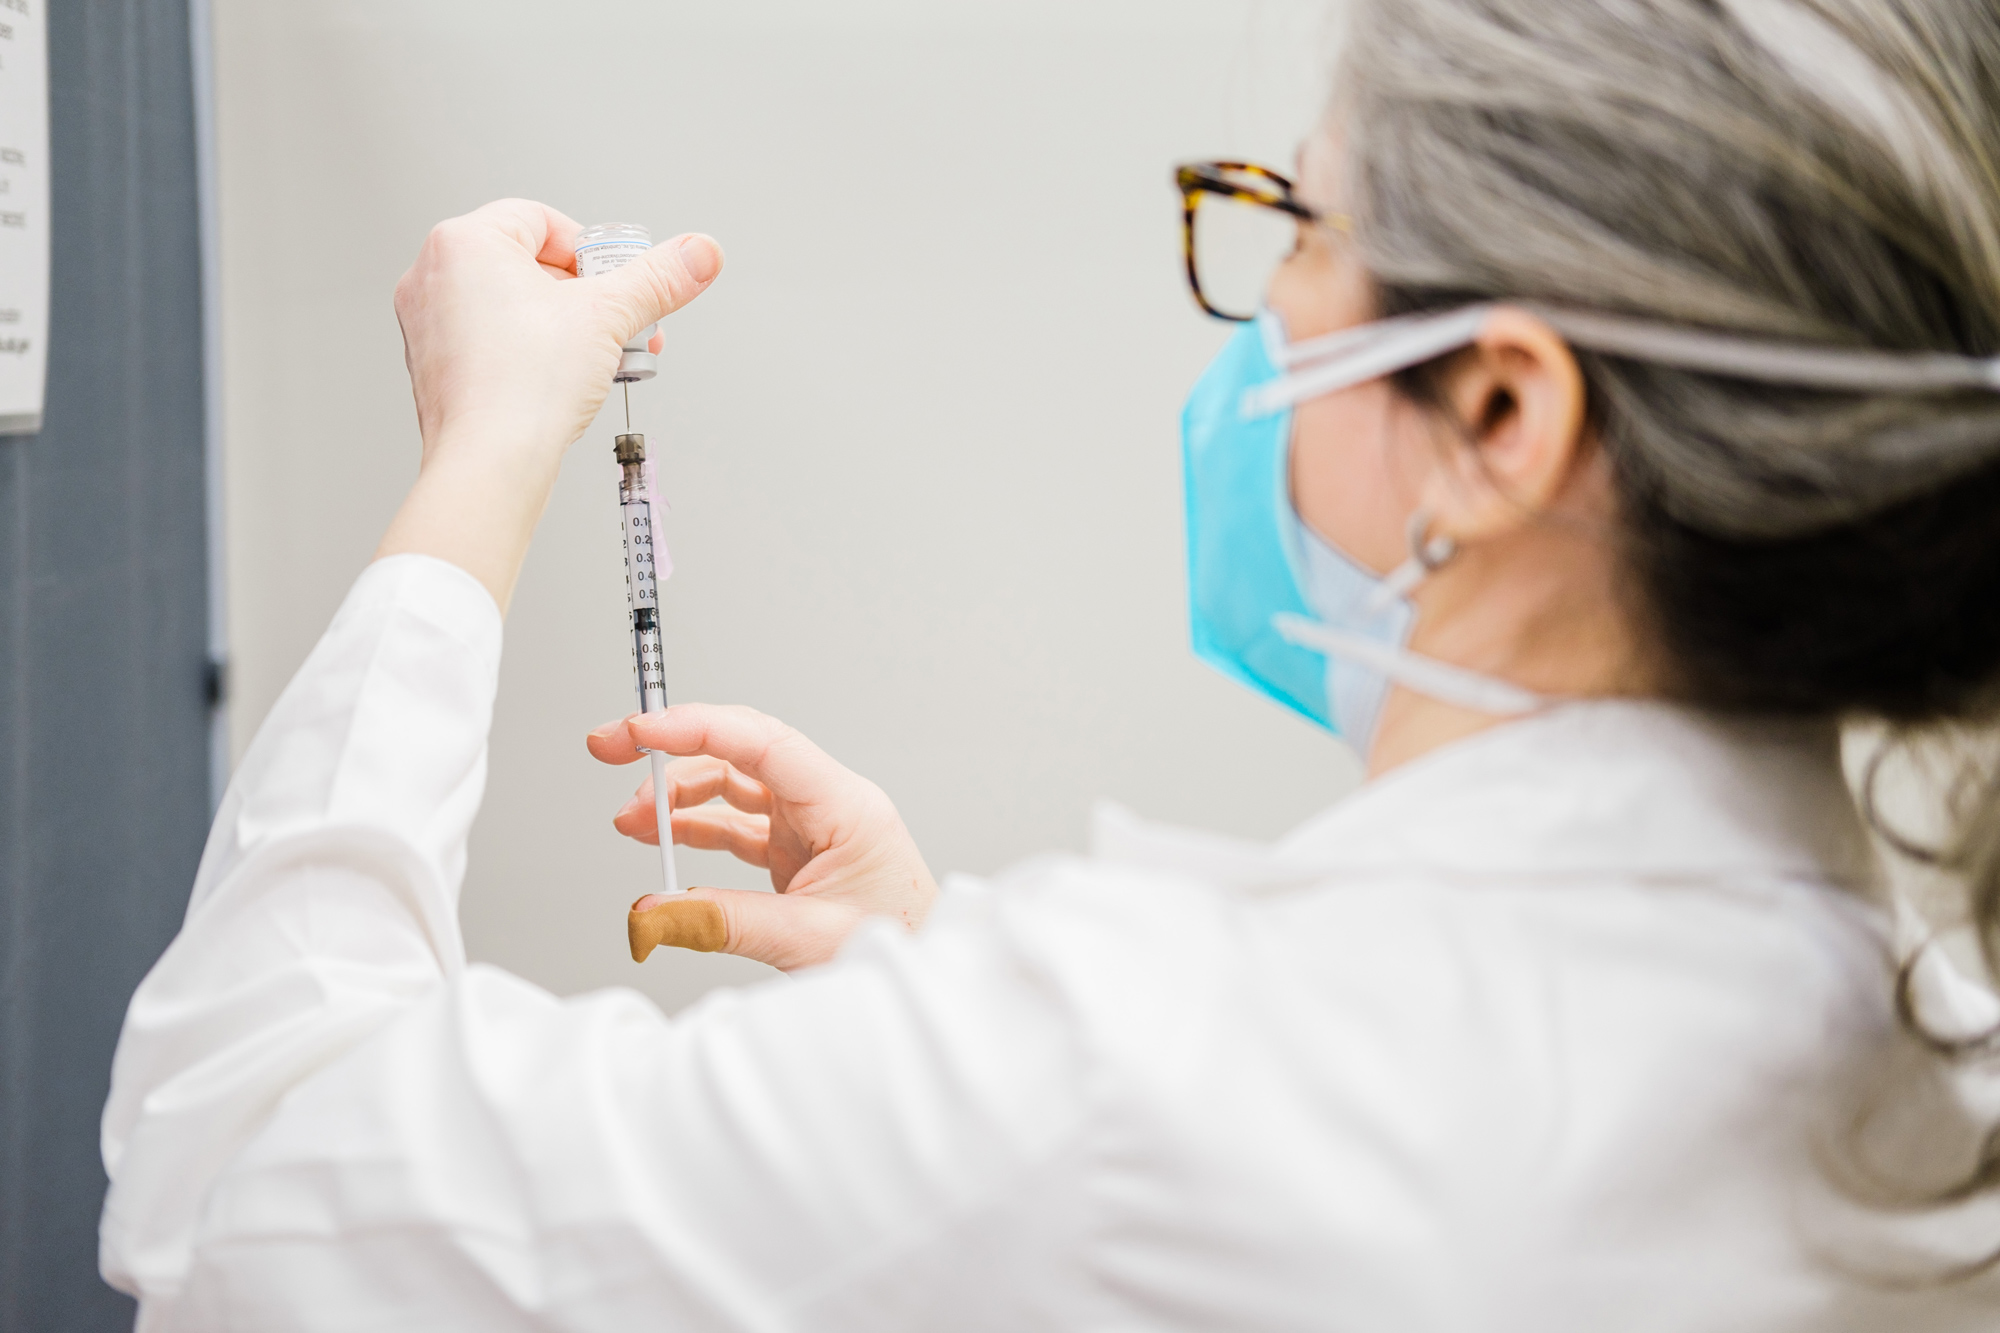 A pharmacists prepares a dose of the Moderna Covid-19 vaccination at a CVS Pharmacy location in Eastchester, New York, on February 12.